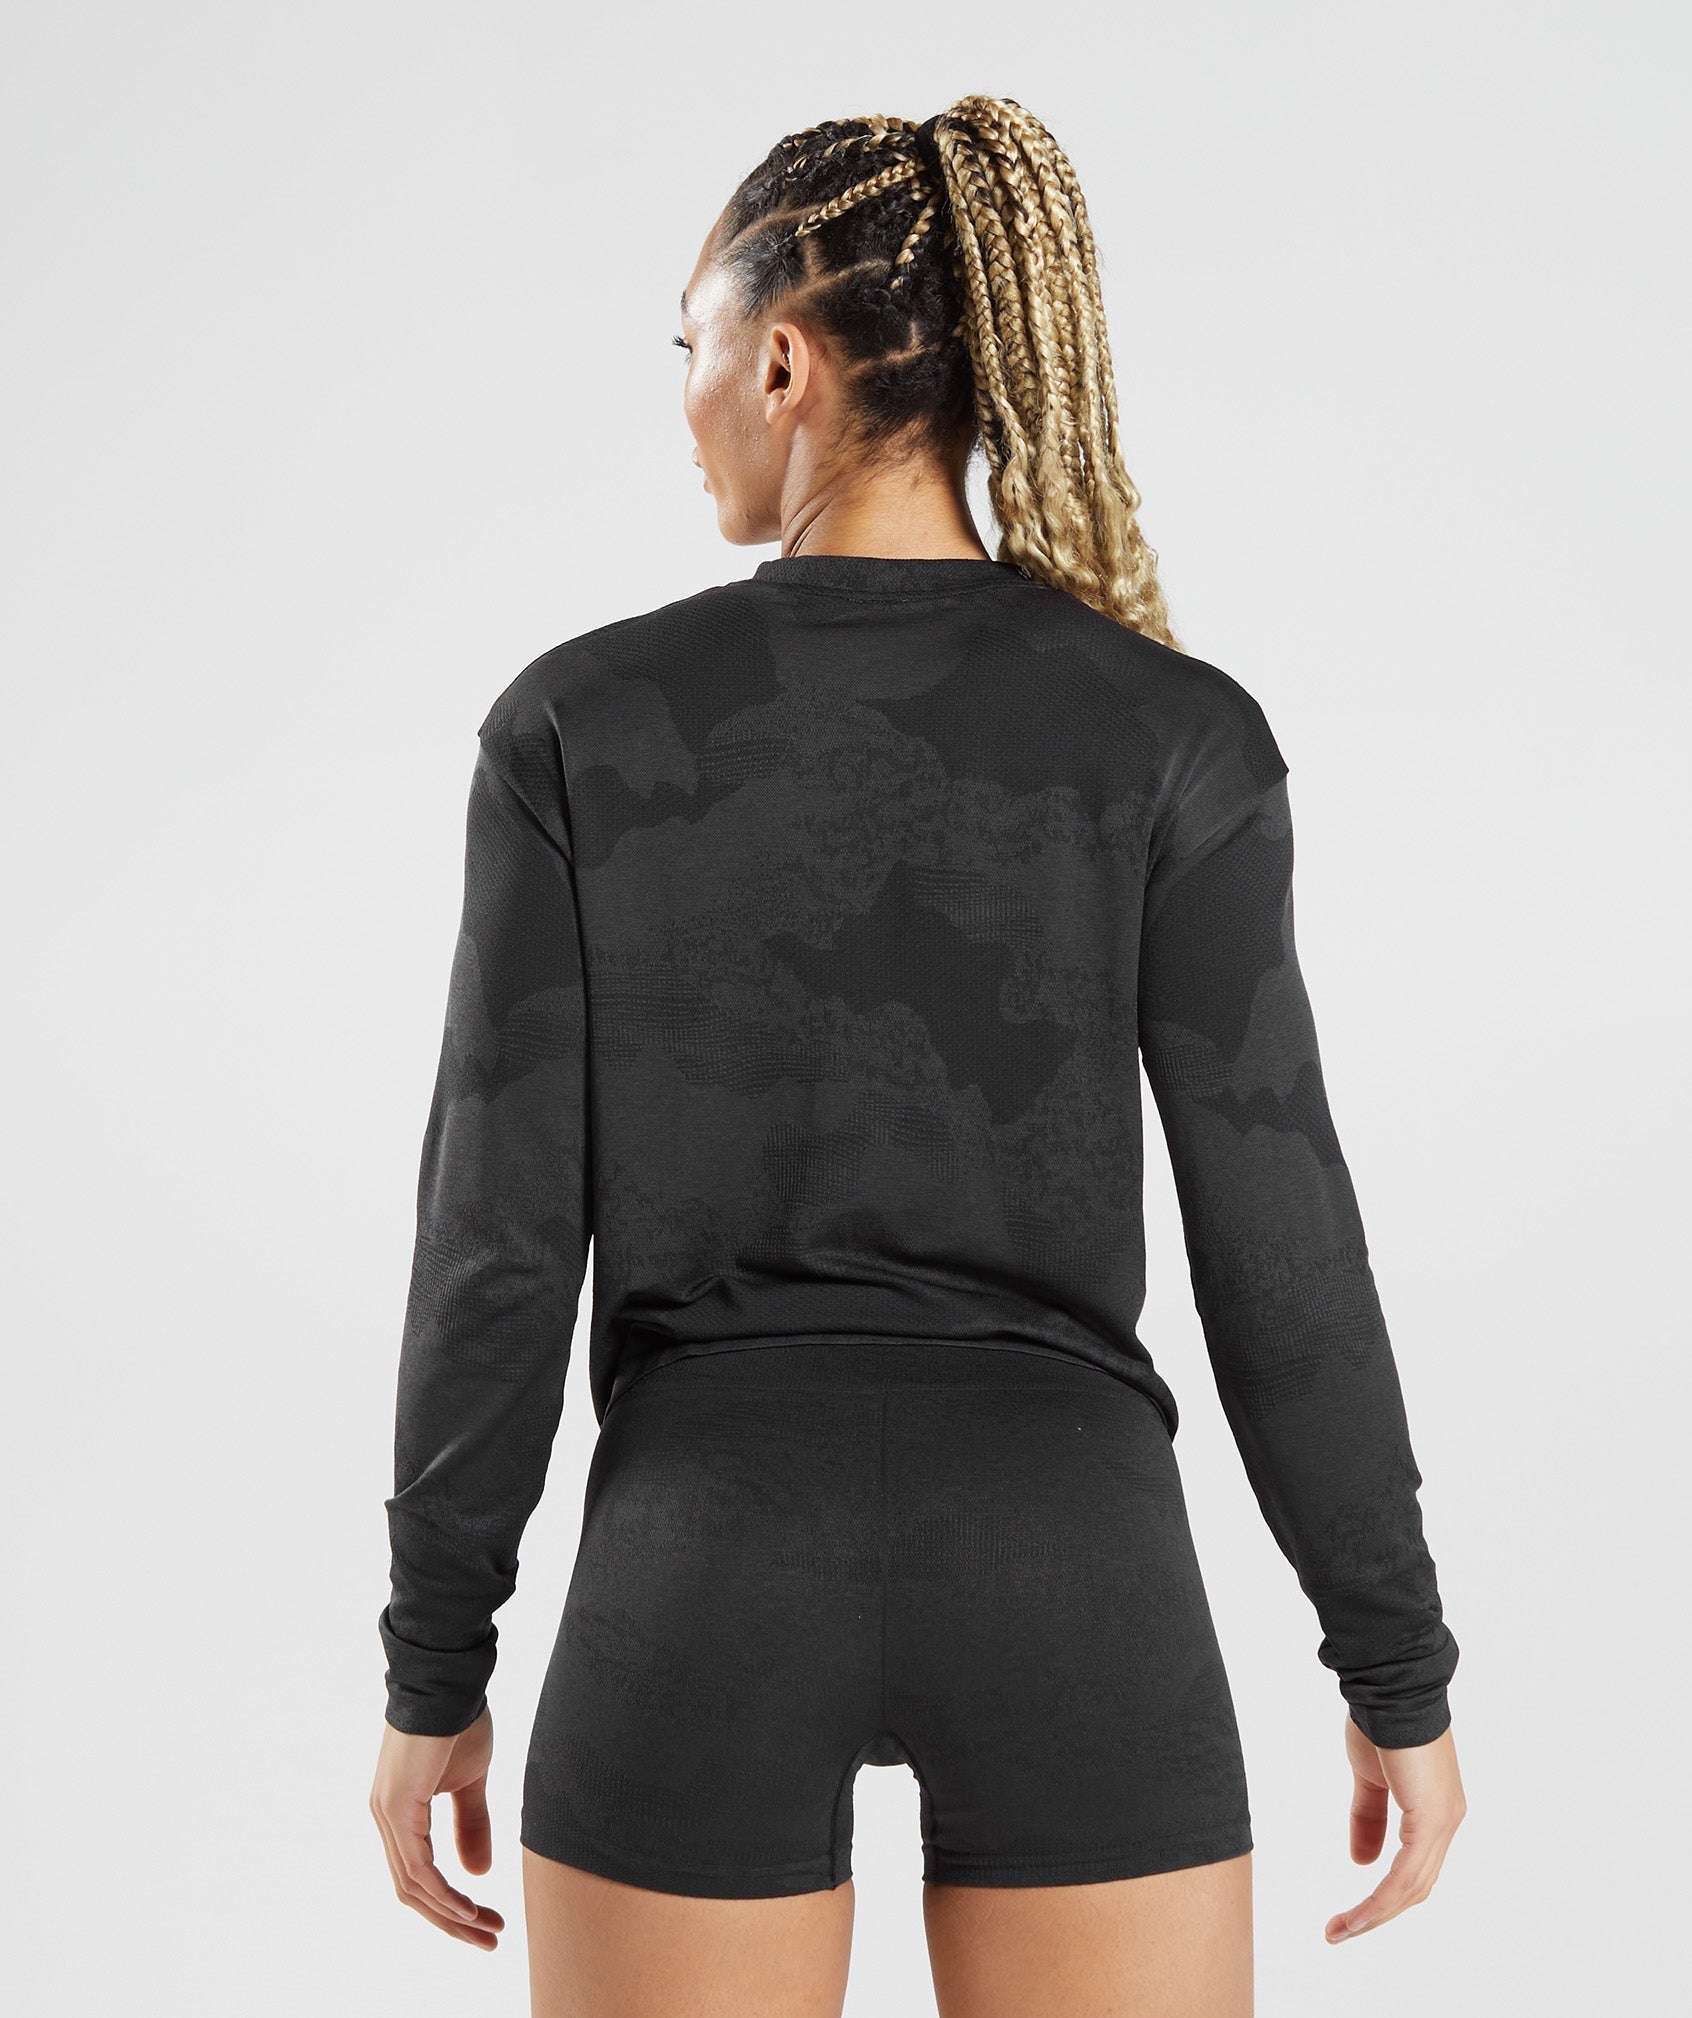 Adapt Camo Seamless Long Sleeve Top in Lava | Black - view 2